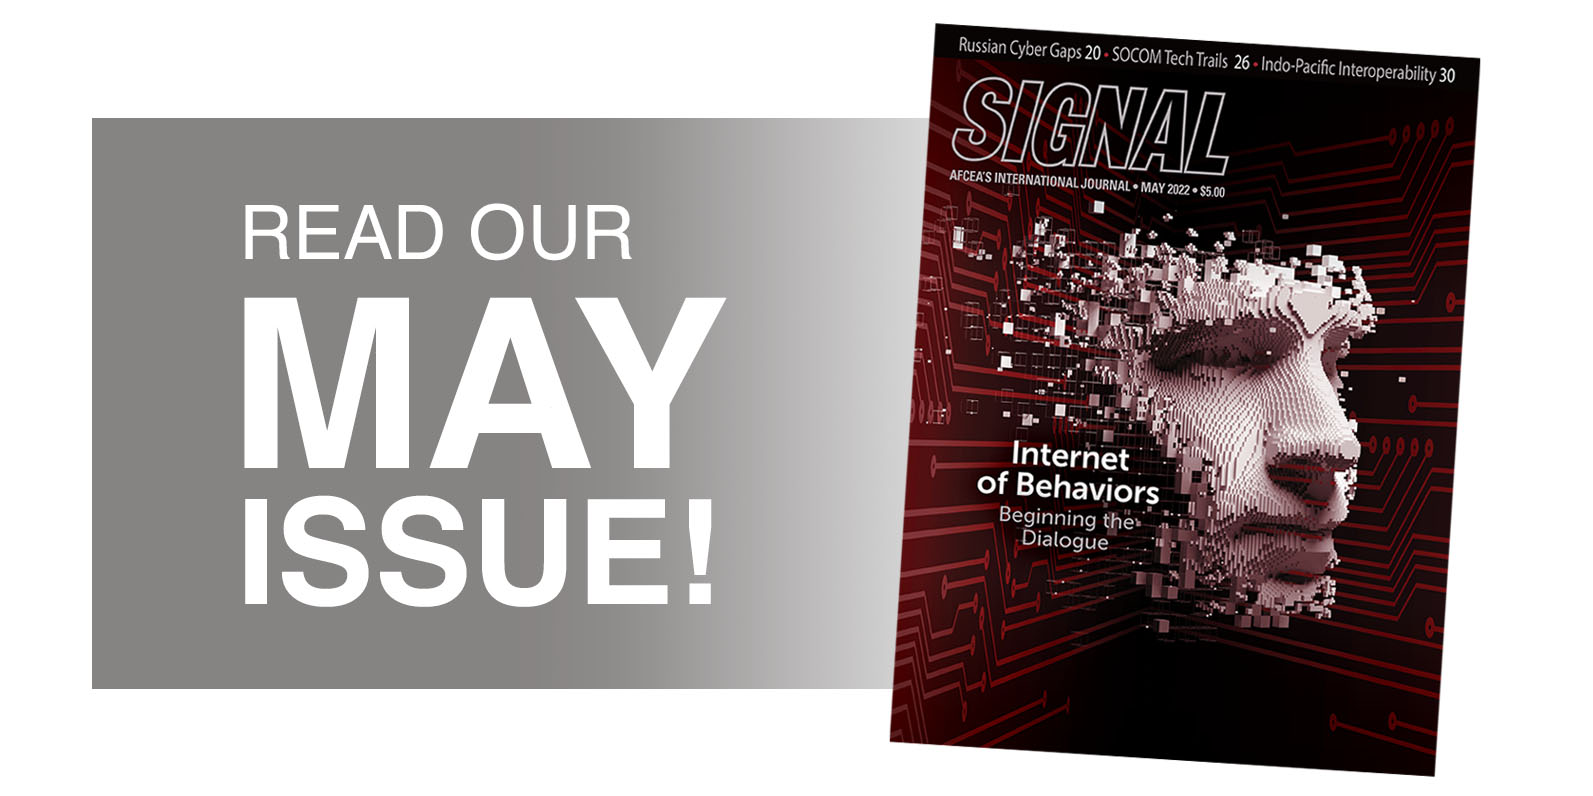 SIGNAL May issue